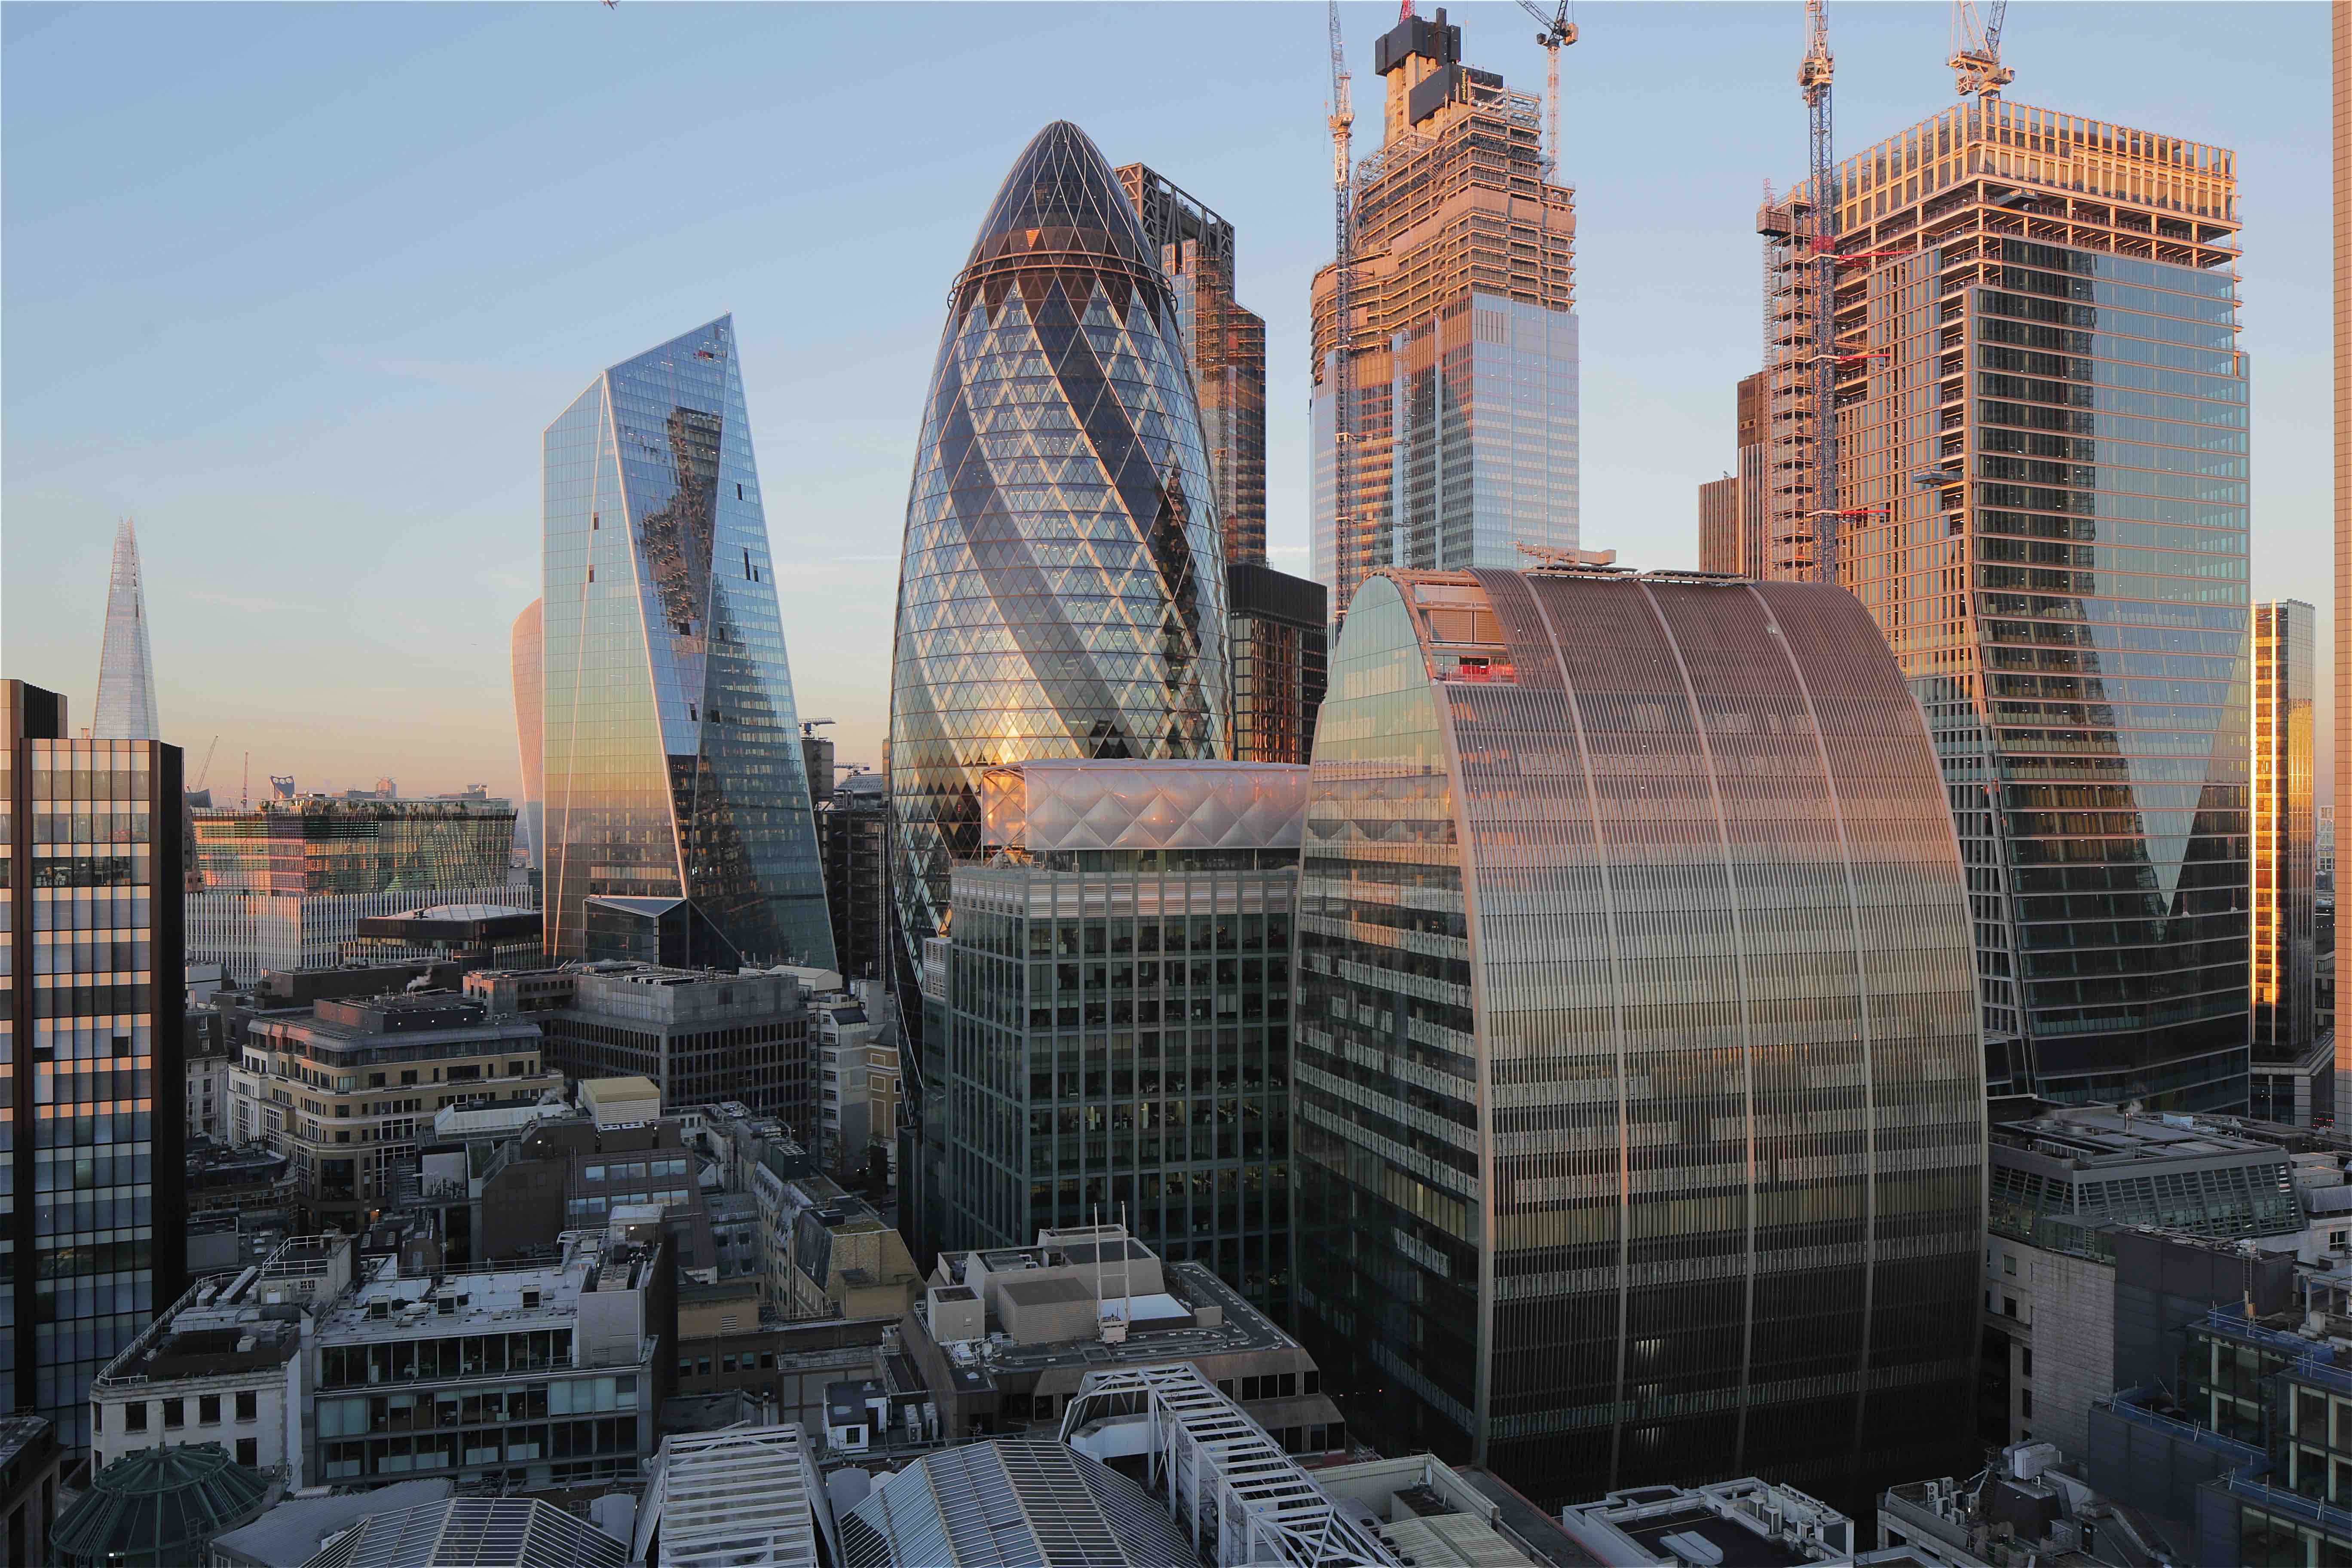 An image of the London skyline captured by Time-Lapse Systems.